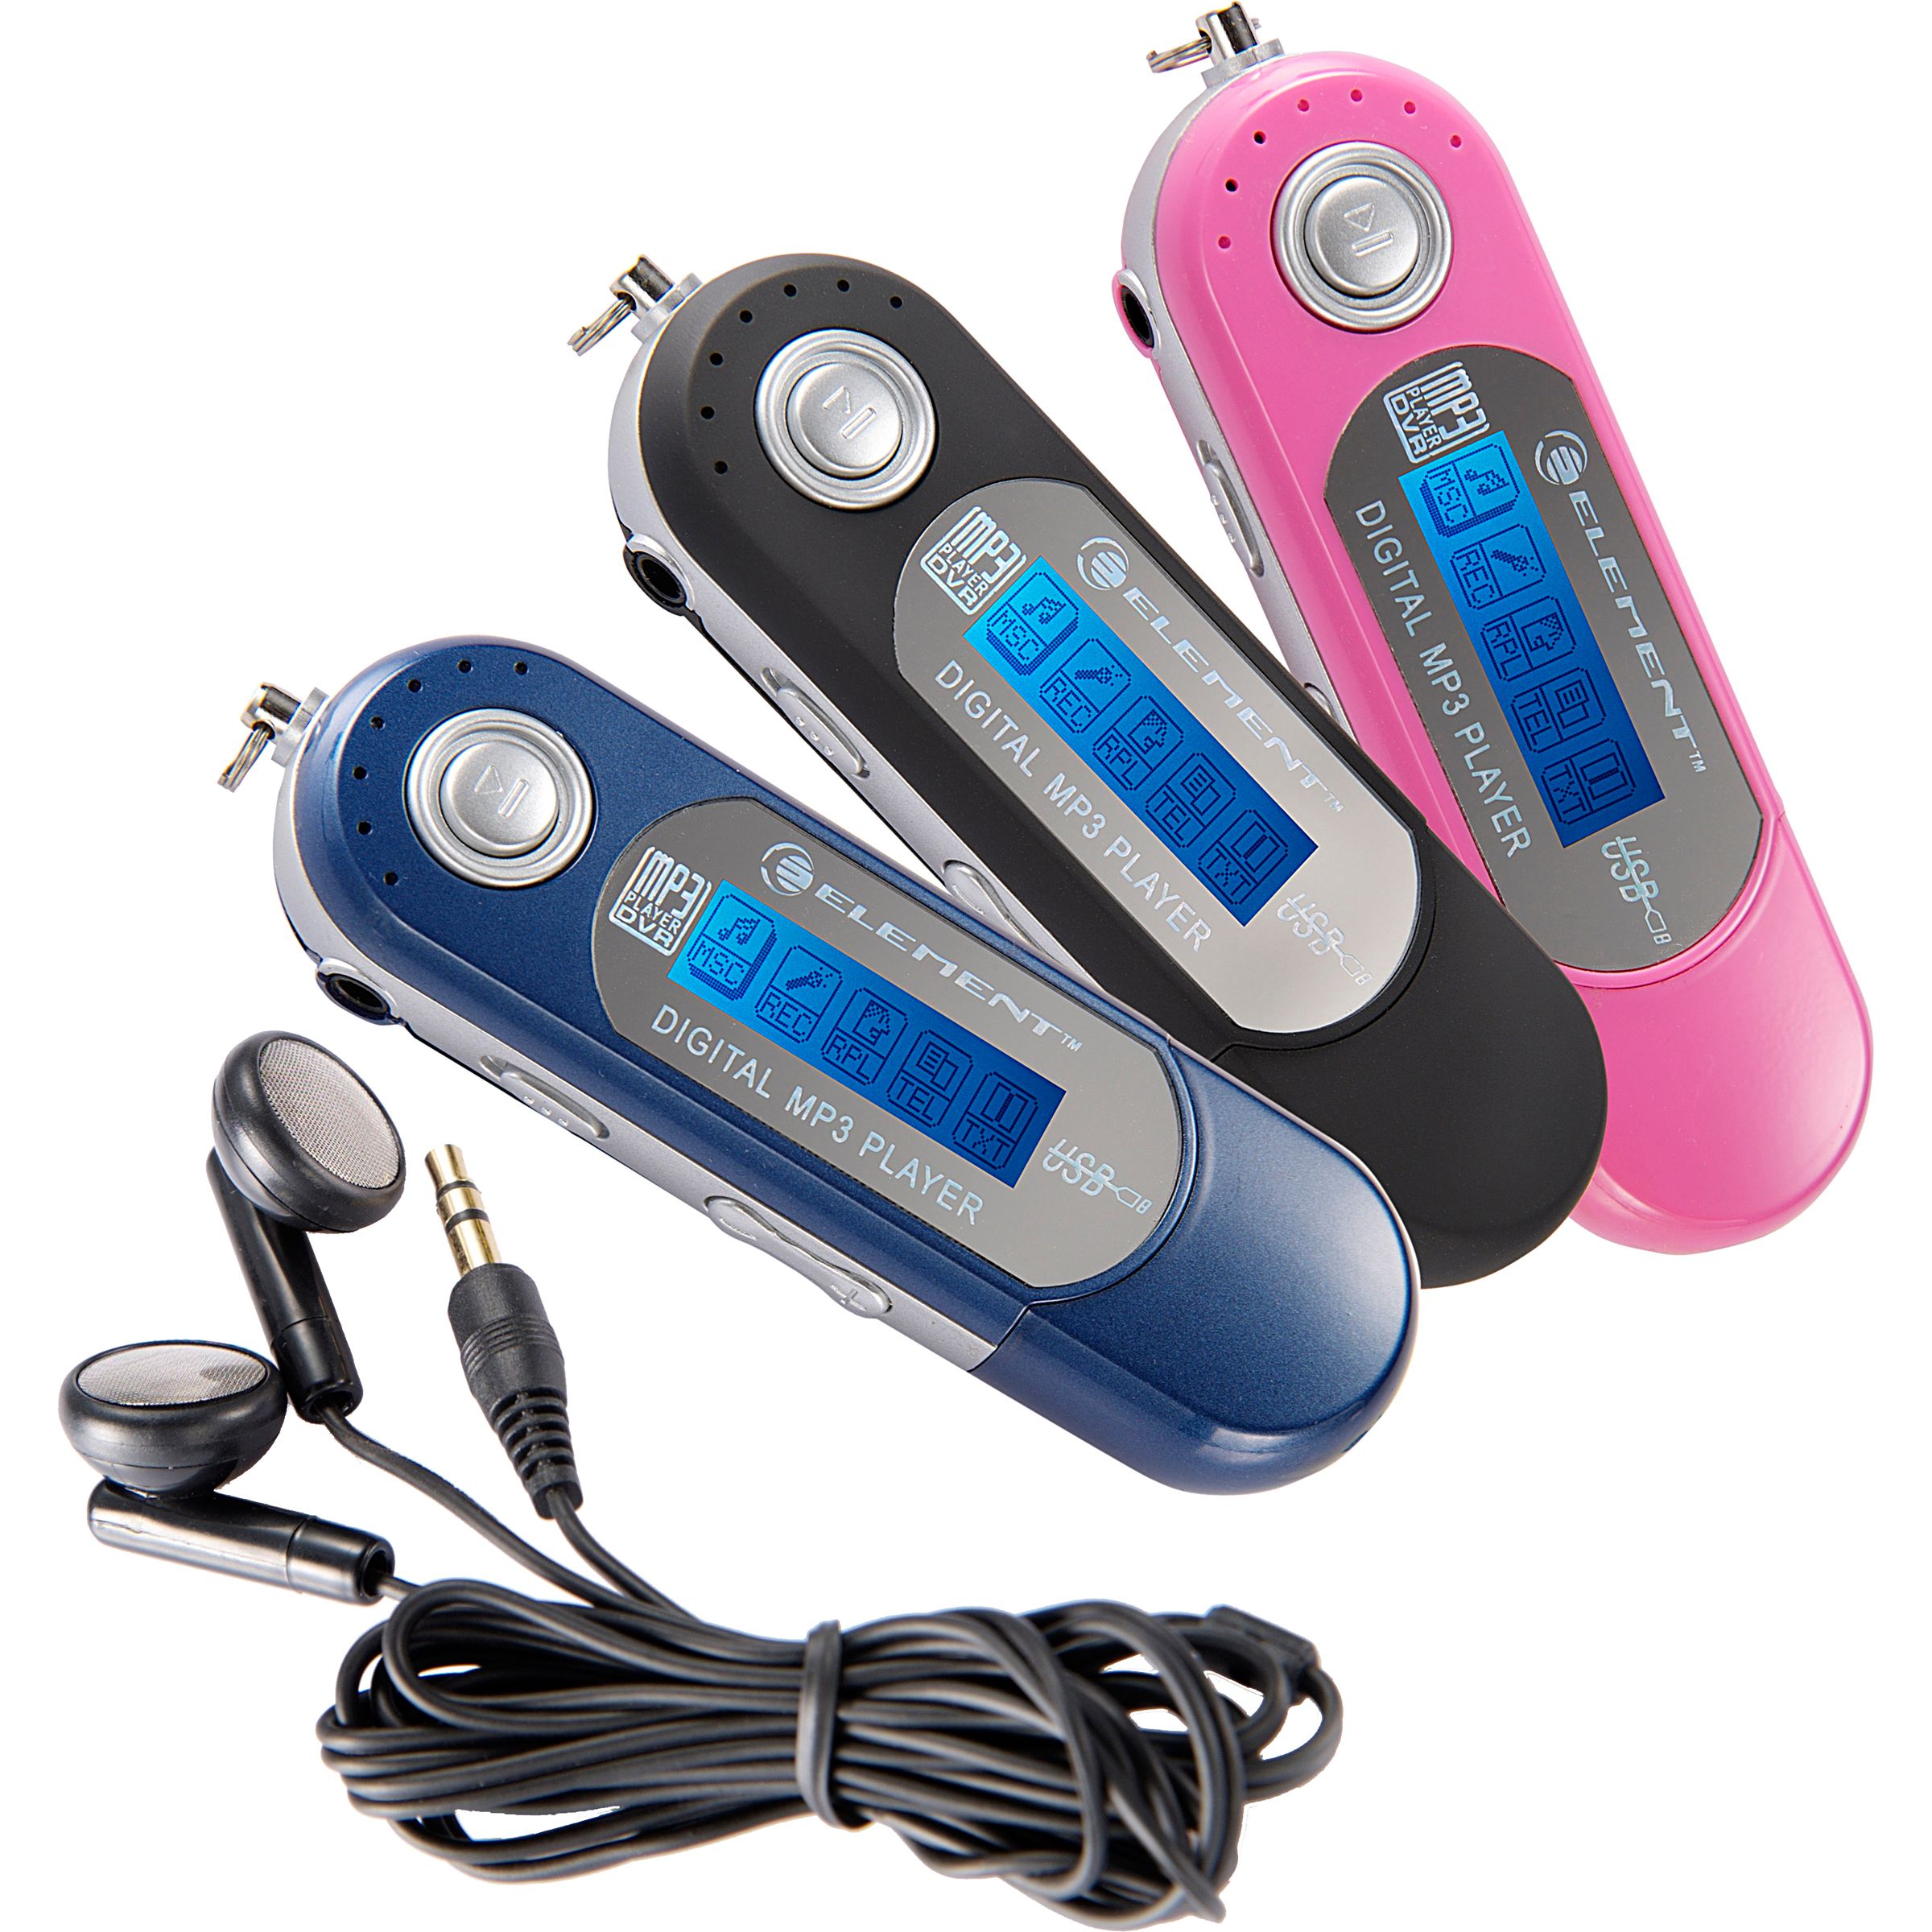 Element GC-821 2GB MP3 Player - Pink